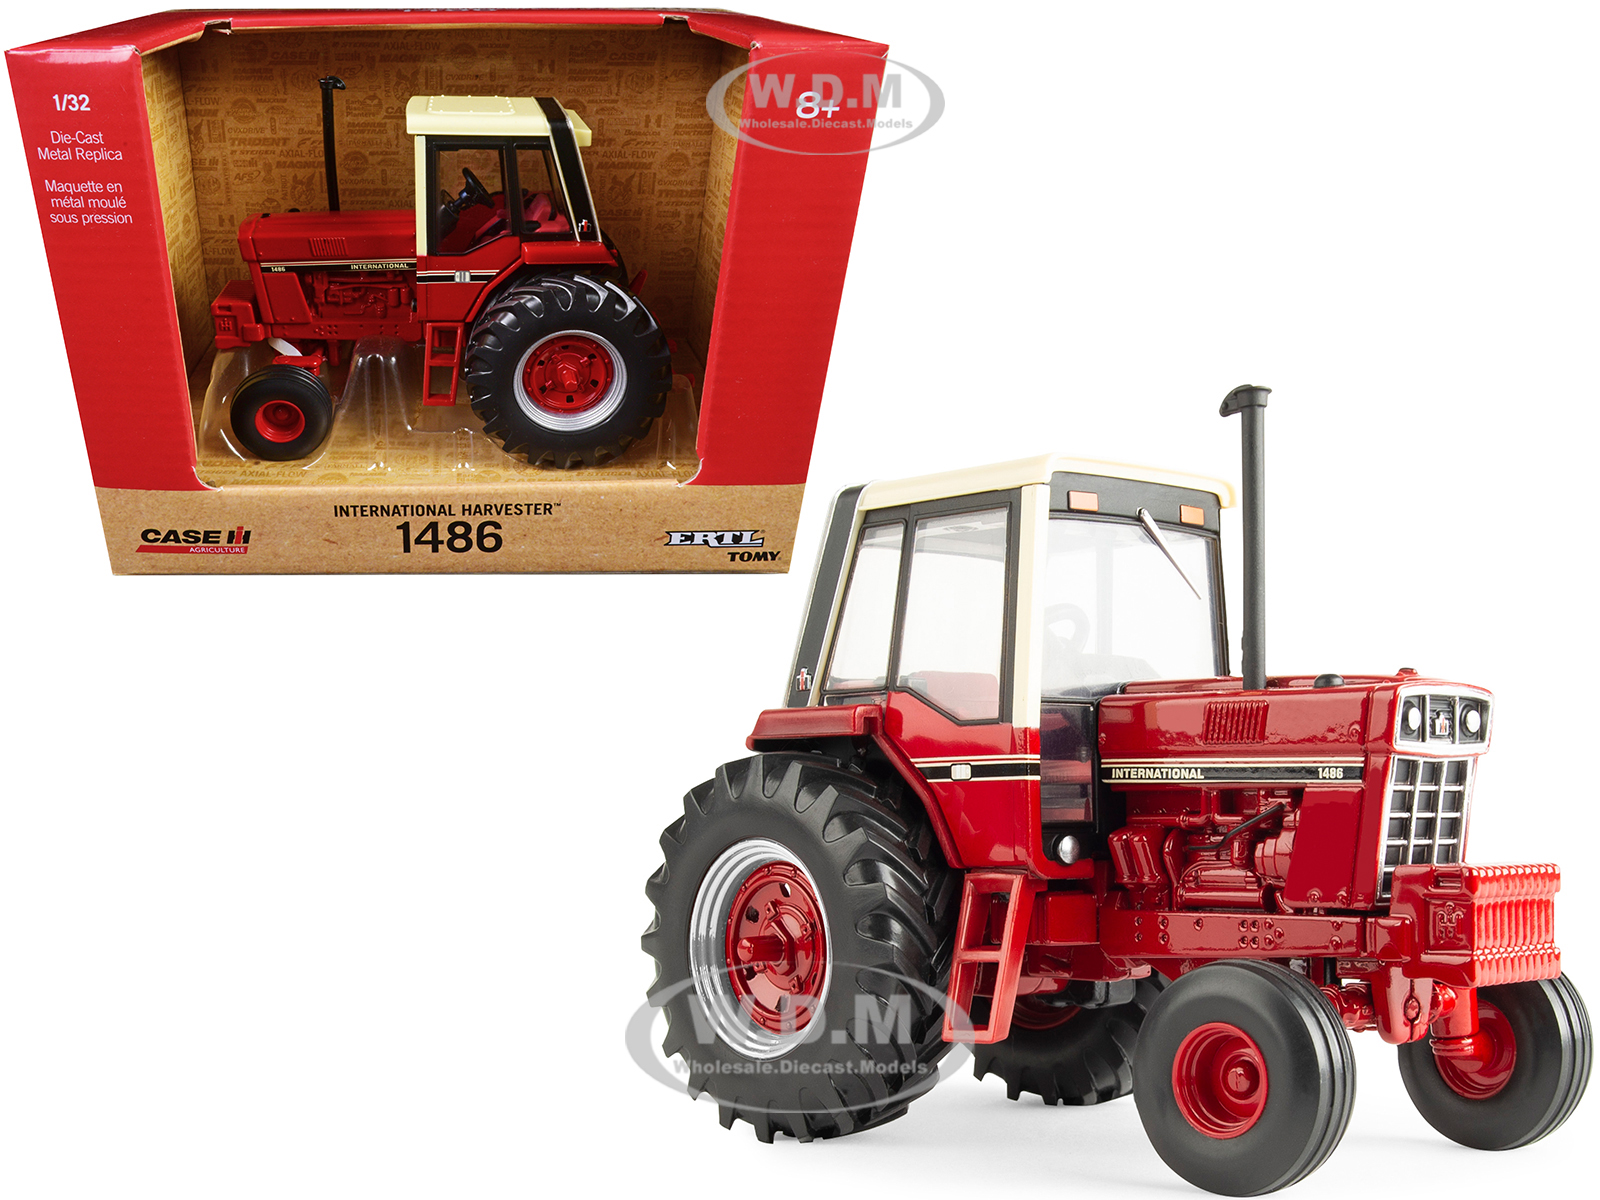 International Harvester 1486 Tractor Red with Cream Top "Case IH Agriculture" Series 1/32 Diecast Model by ERTL TOMY